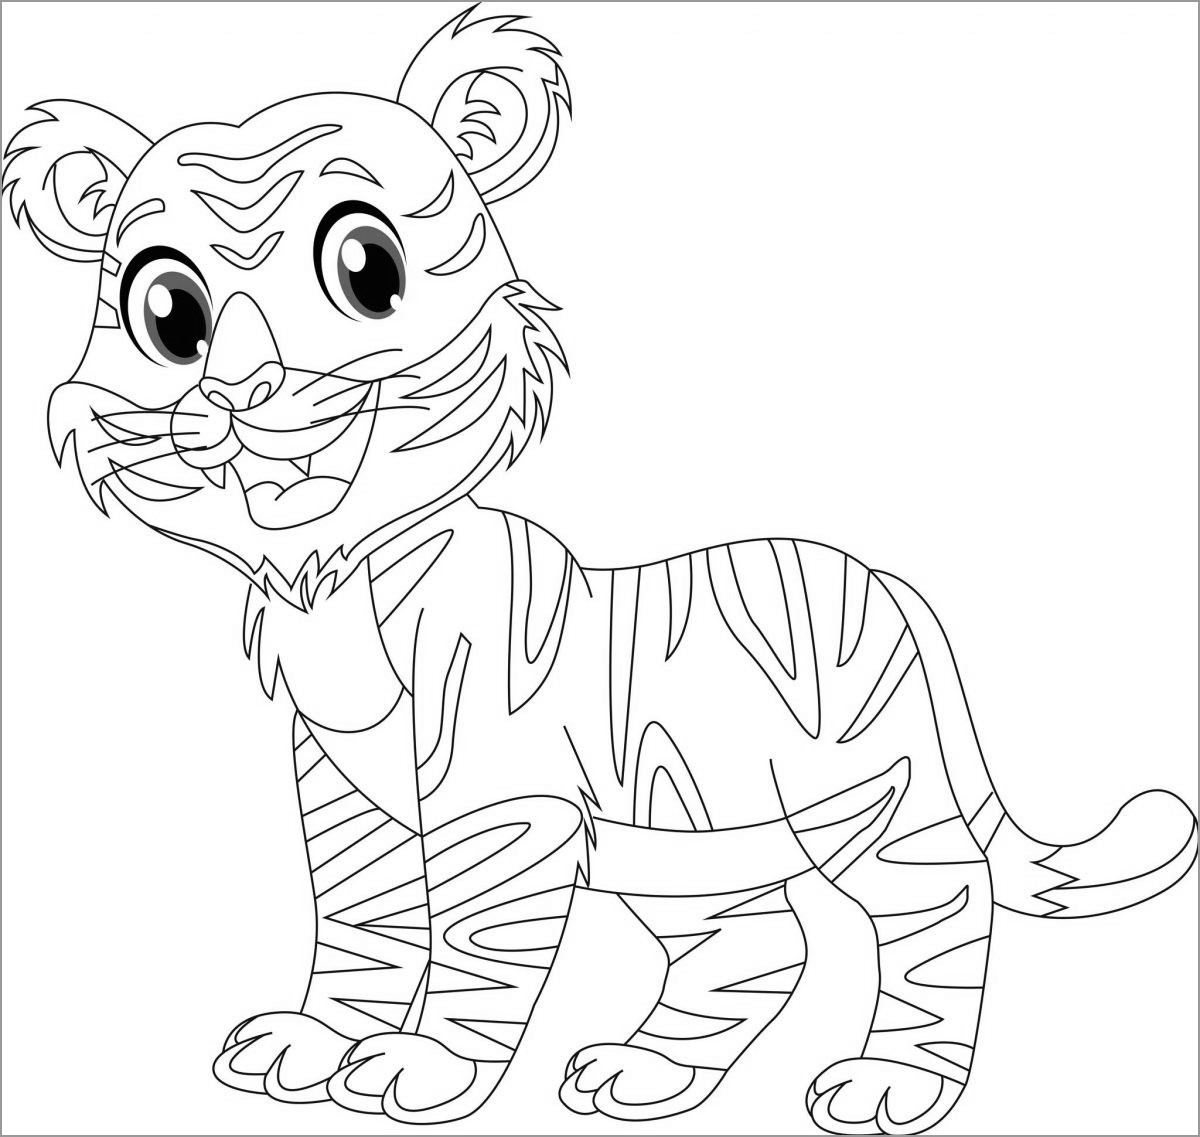 Tiger coloring book for kids 6-7 years old